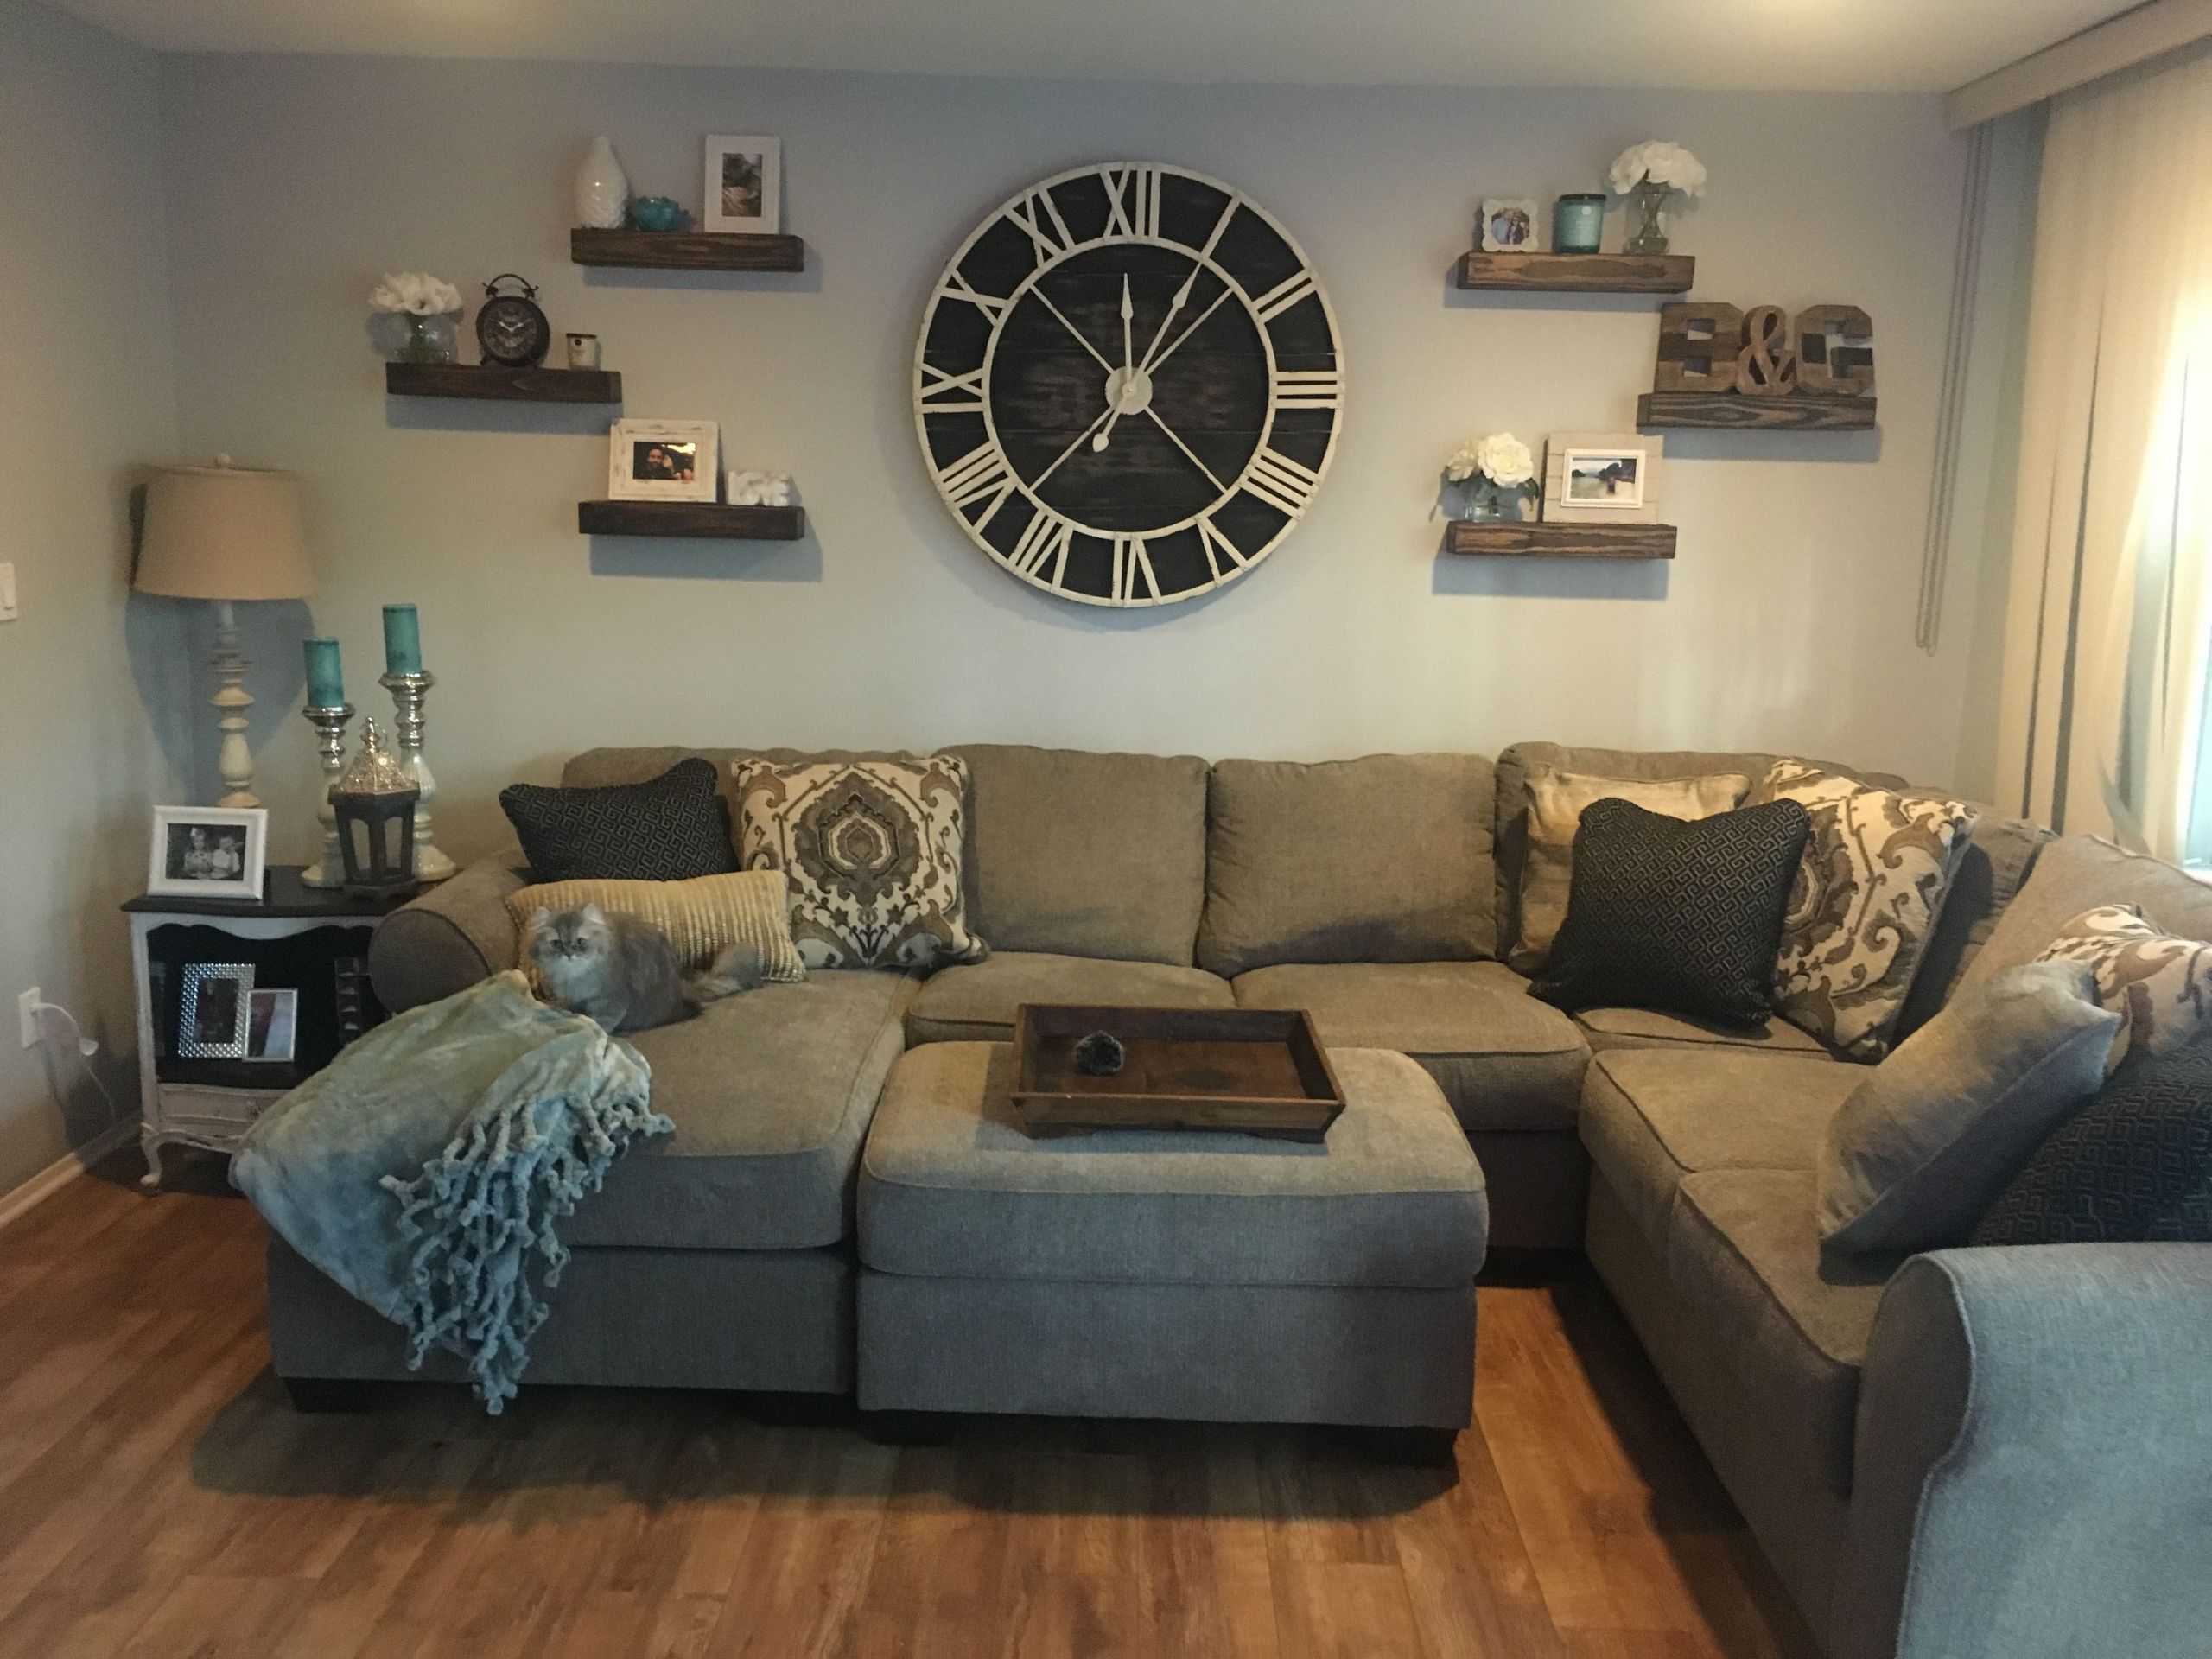 Wall Clock For Living Room
 Oversized wall clock with floating shelves in 2019